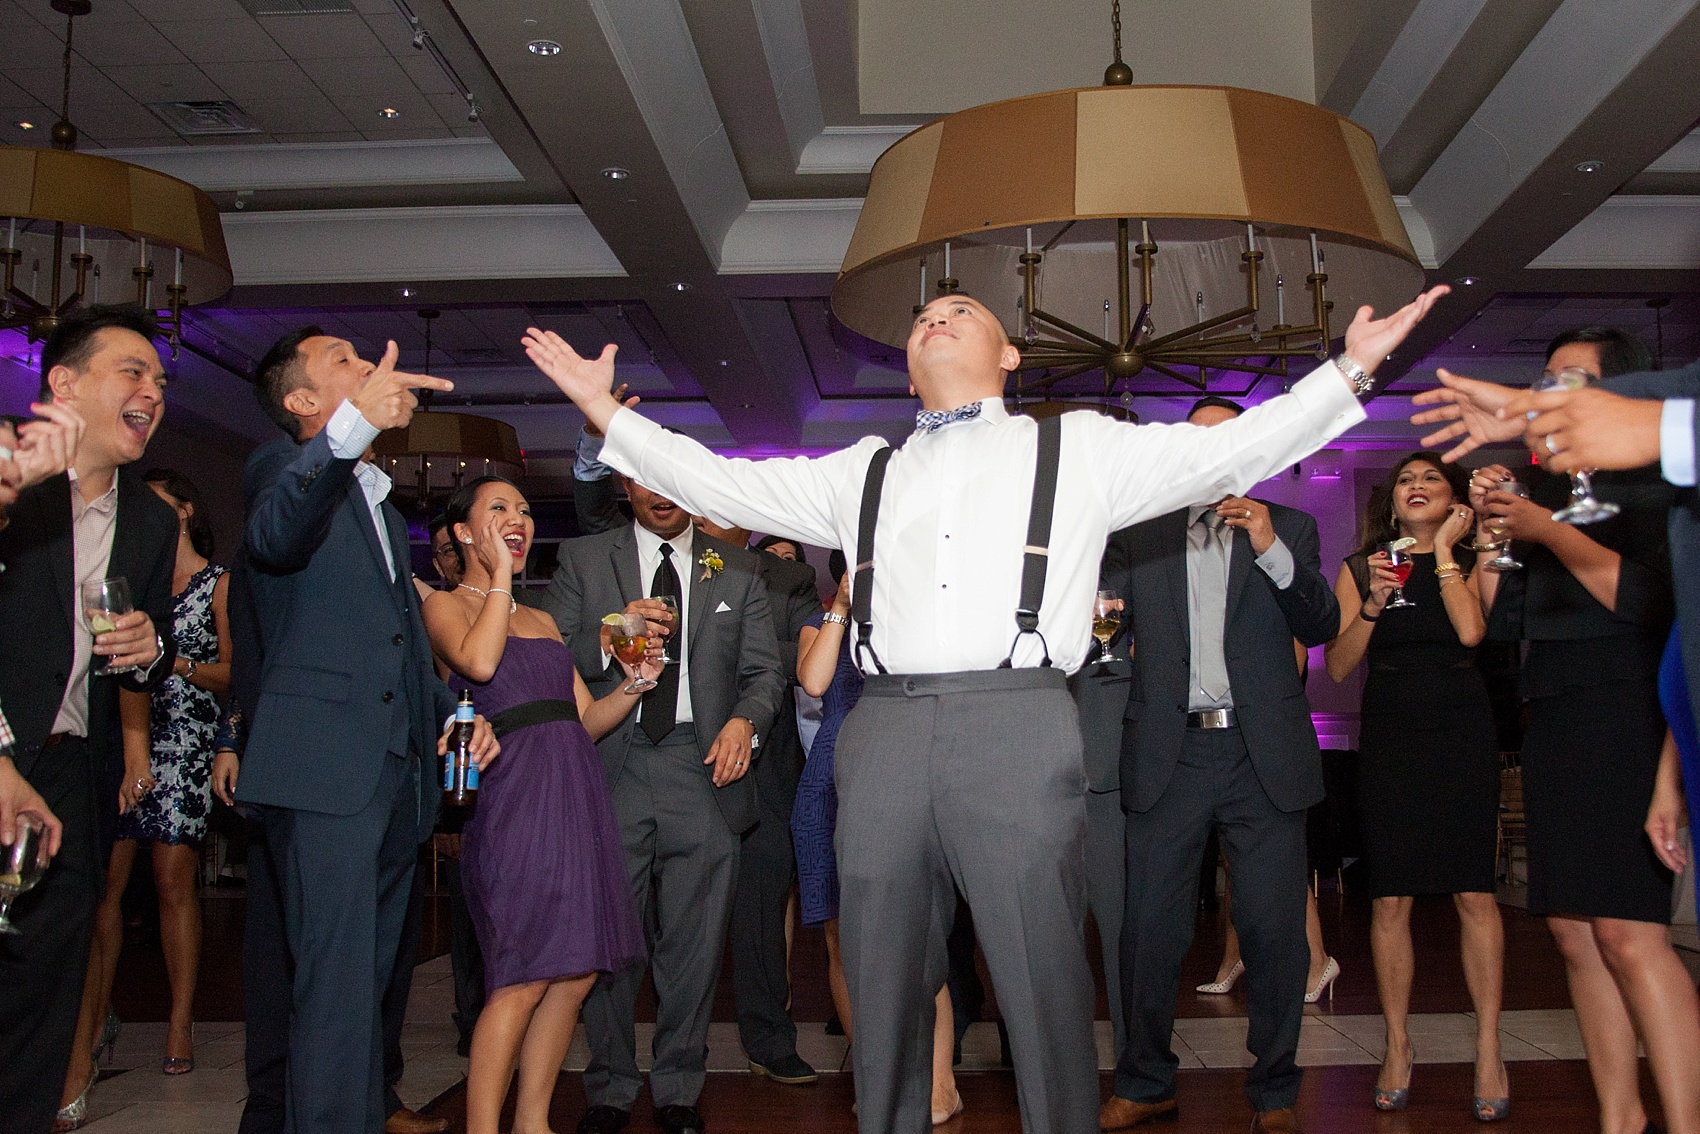 Groom on the dance floor! Stonehouse at Stirling Ridge fall wedding. Photos by Mikkel Paige Photography, New Jersey wedding photographer.